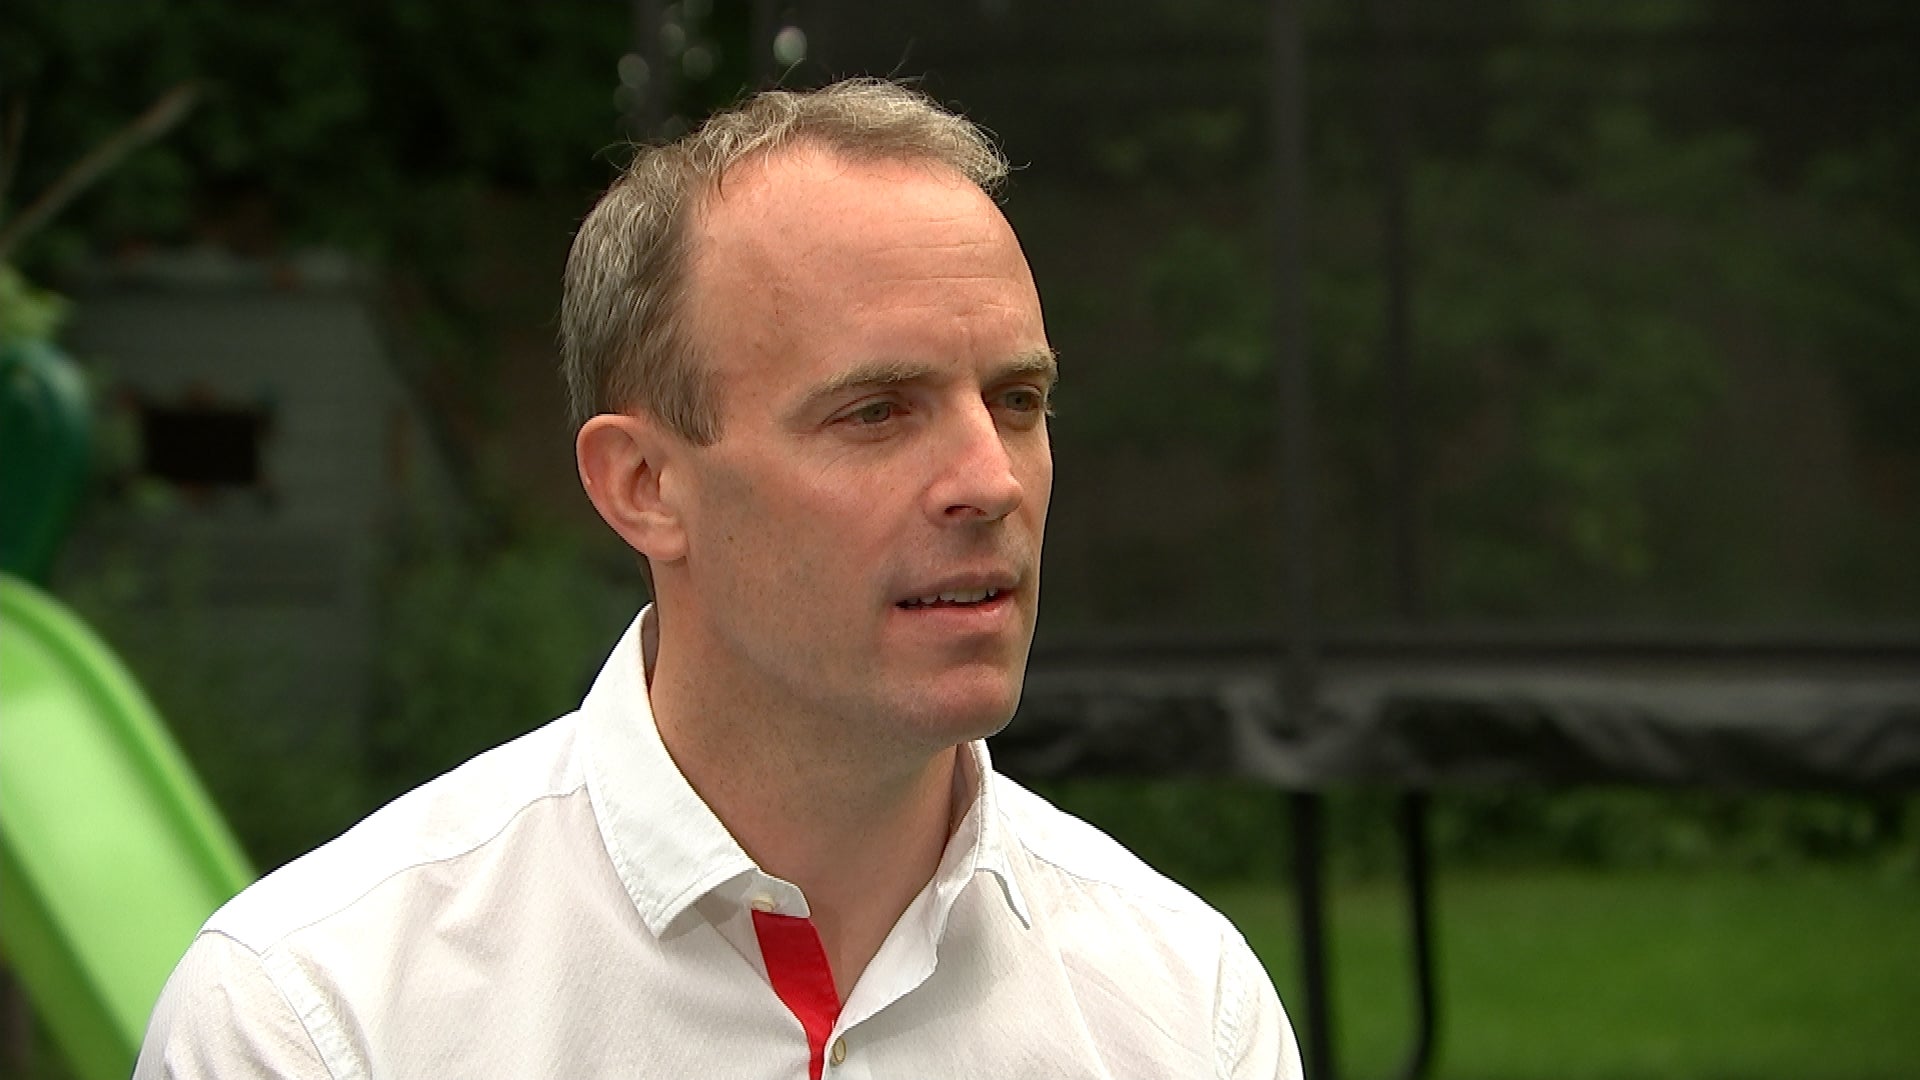 Tory leadership contender Dominic Raab says it should not be easier to change your gender